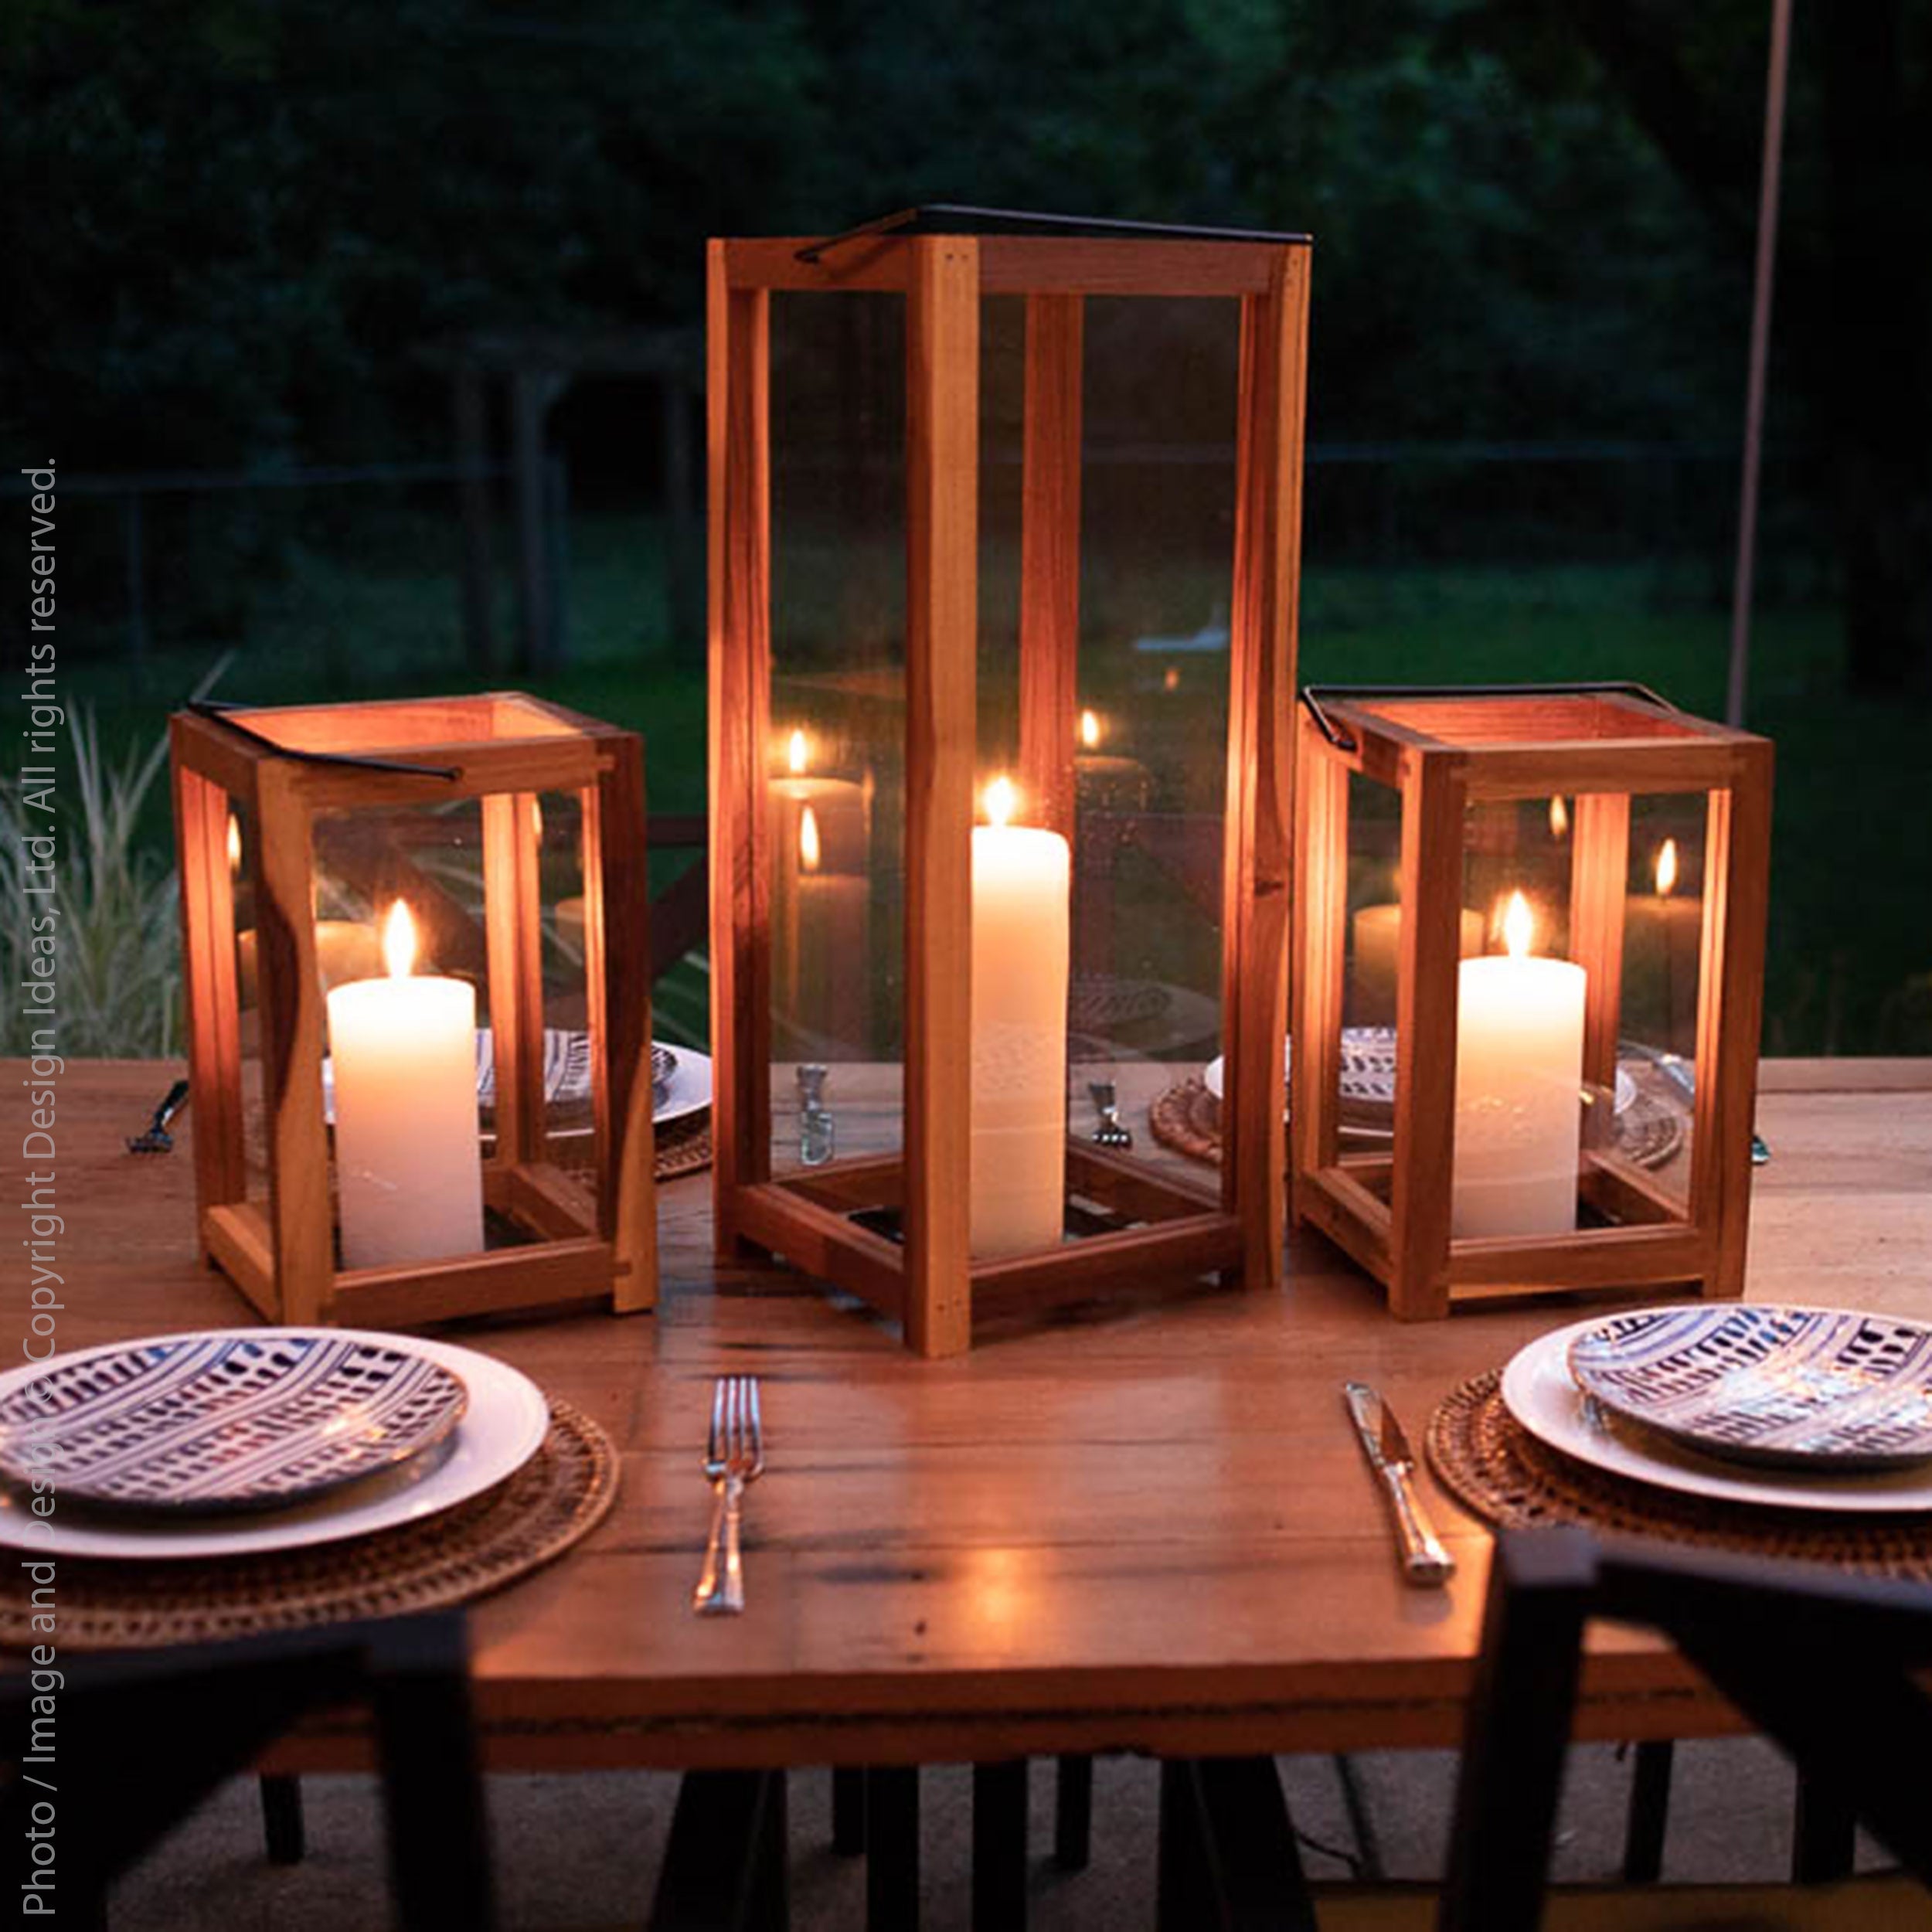 Takara Teak Lantern (Small) Silver Color | Image 2 | From the Takara Collection | Skillfully handmade with natural teak for long lasting use | This lantern is sustainably sourced | Available in natural color | texxture home